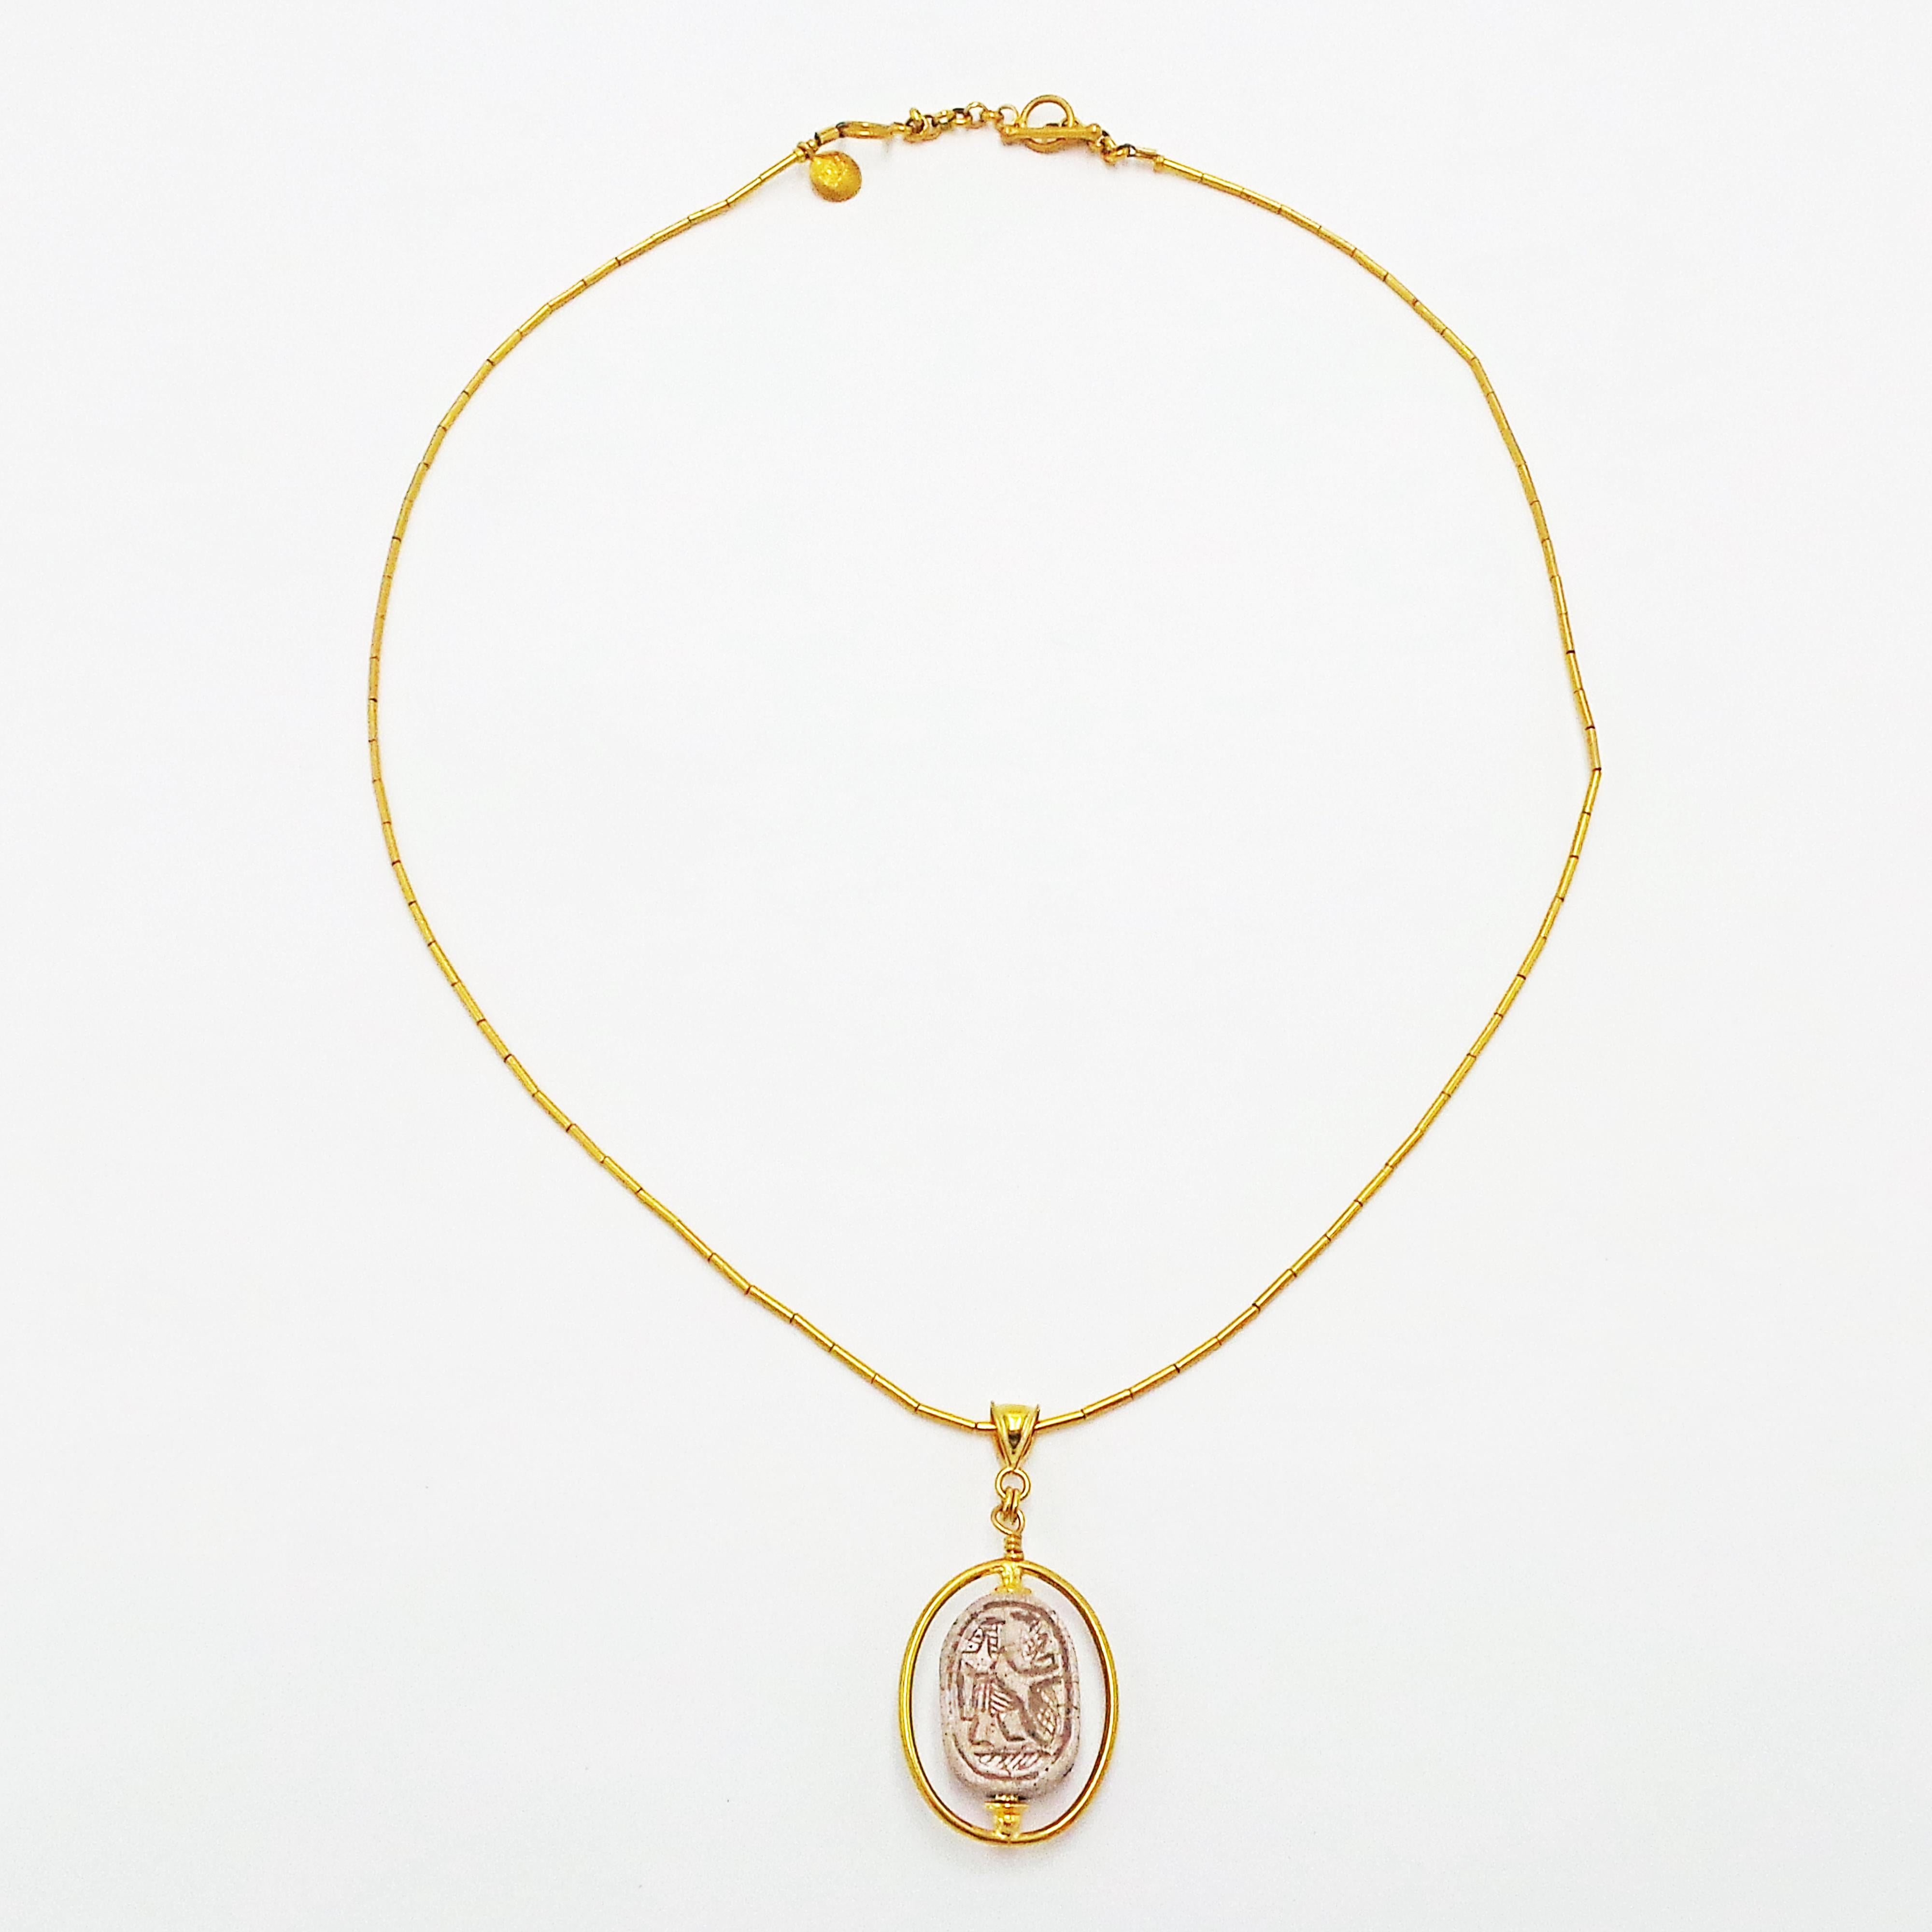 Authentic ancient Egyptian faïence Scarab (1000 BC) and 22k yellow gold spinner/reversible pendant on a 22k yellow gold tube link necklace.